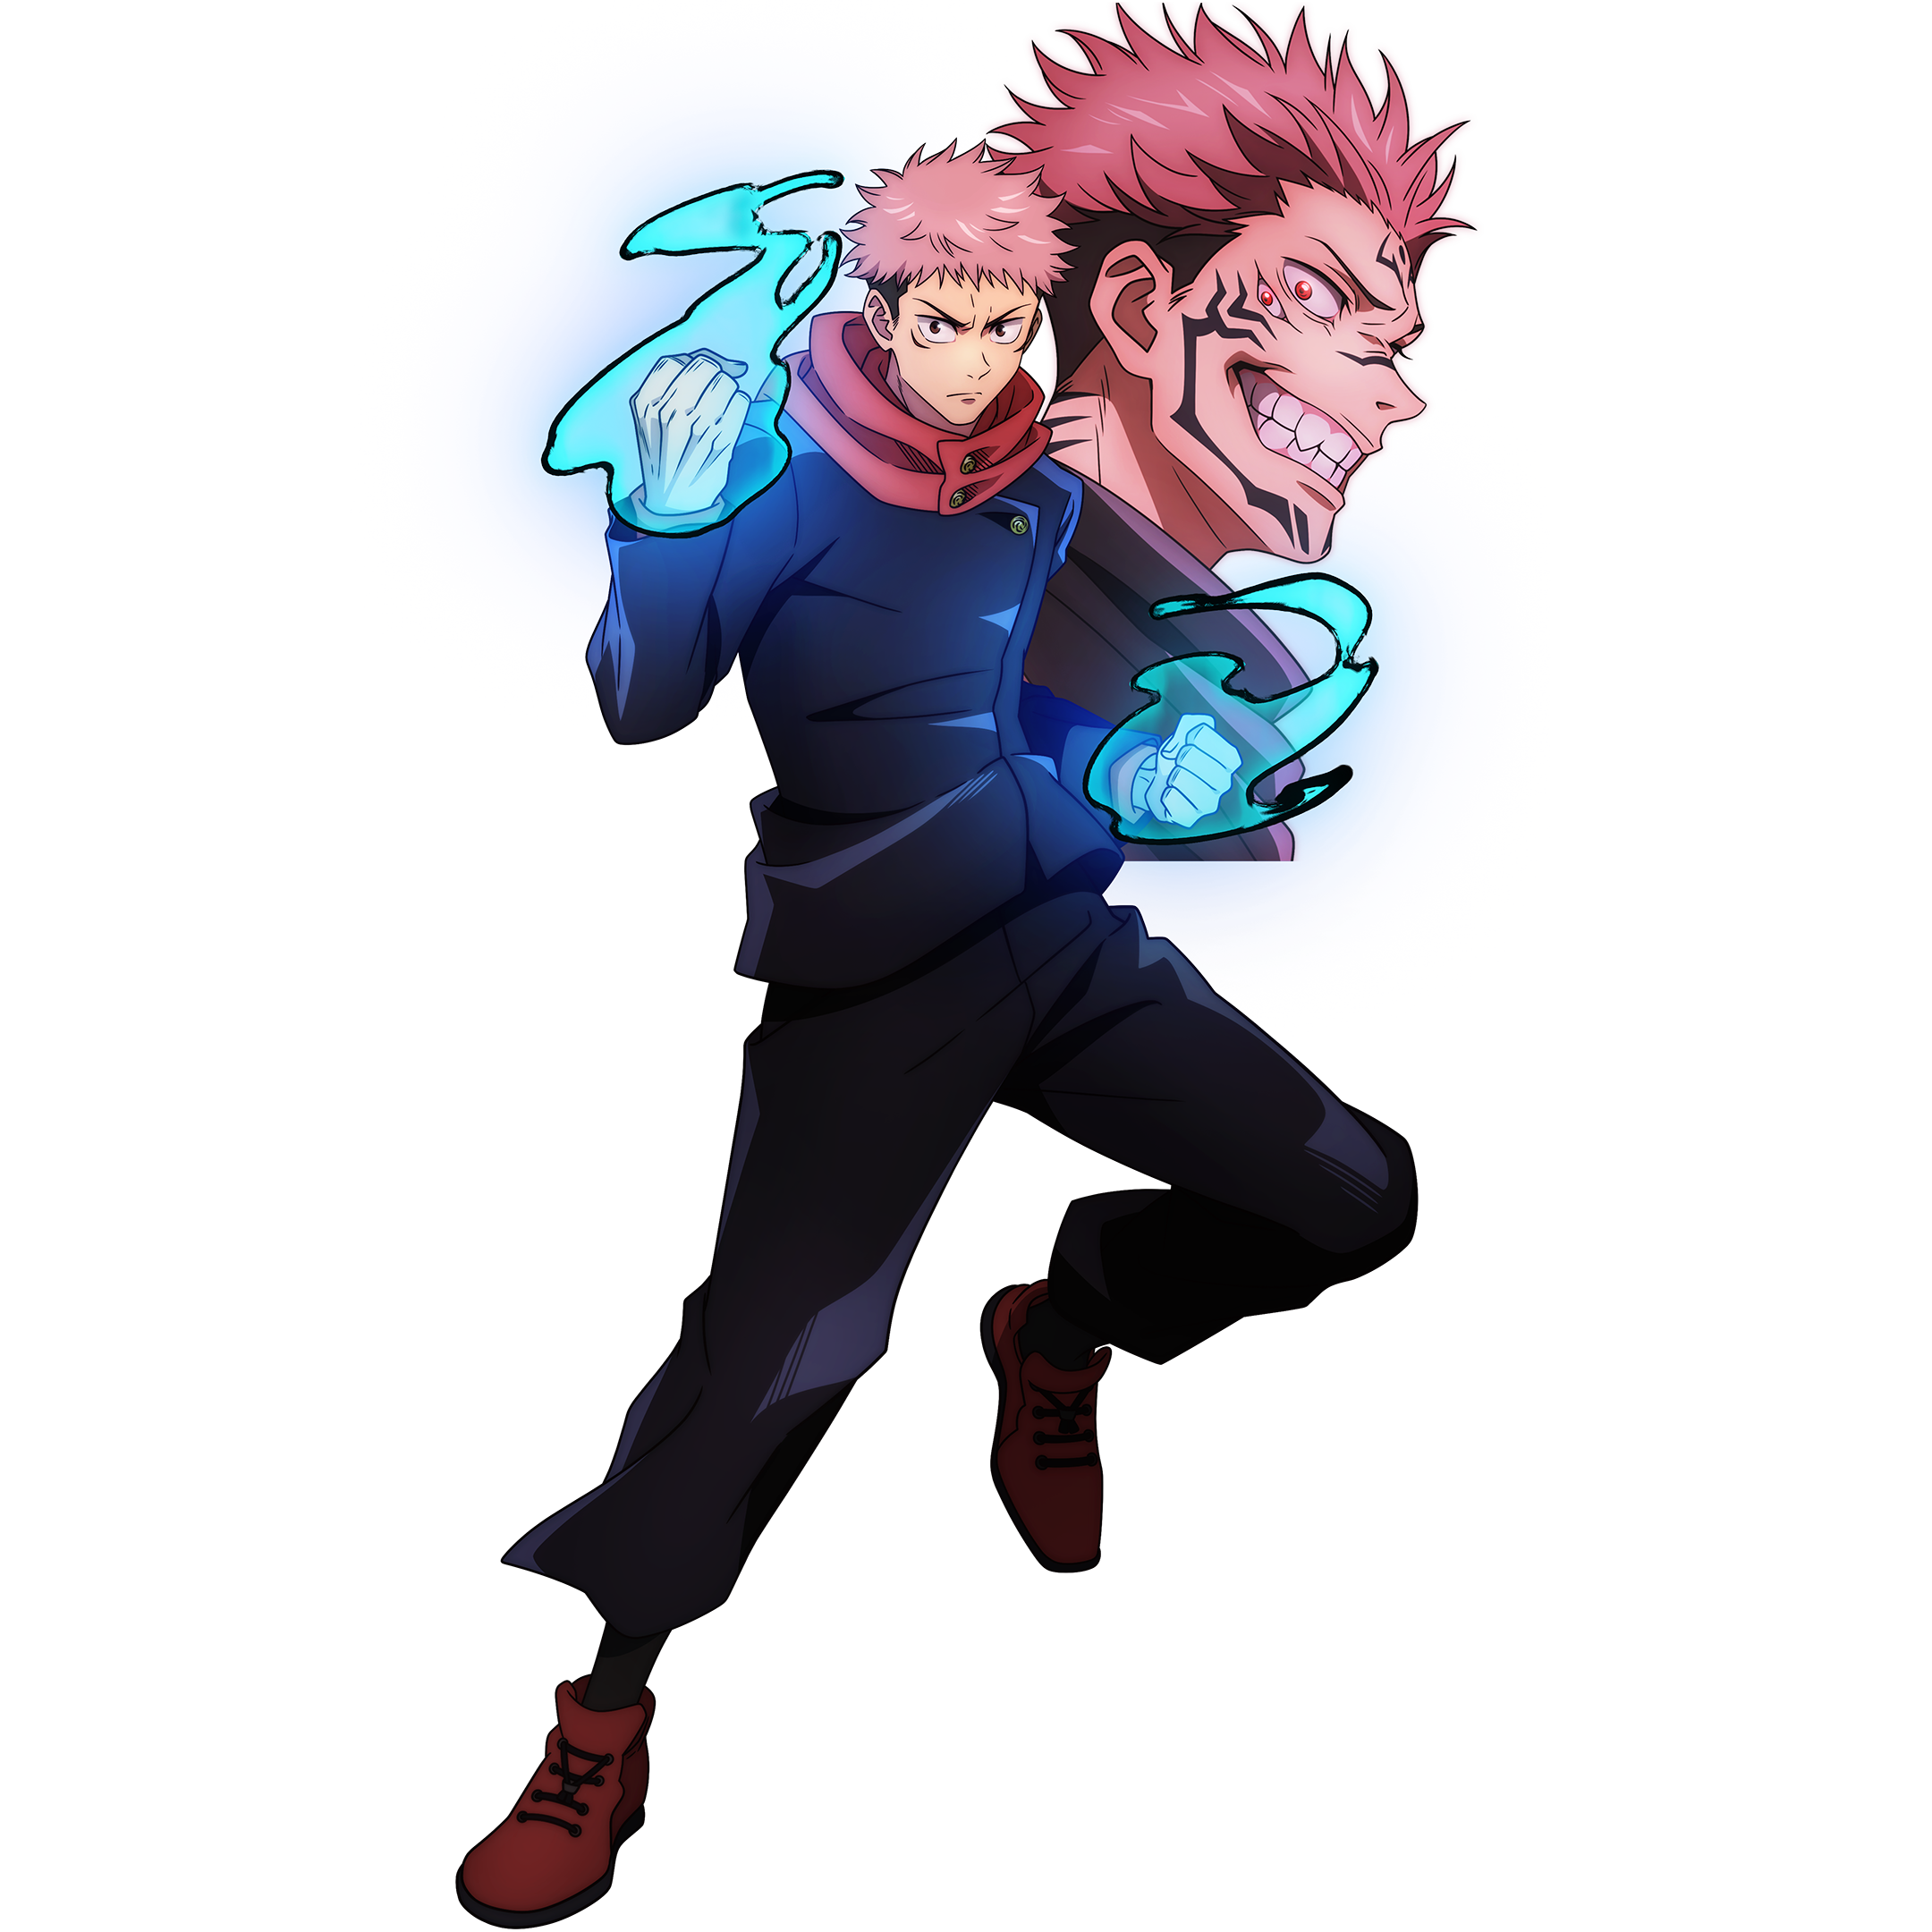 Jujutsu Kaisen Cursed Clash game file size, Framerate, screen resolution  and more